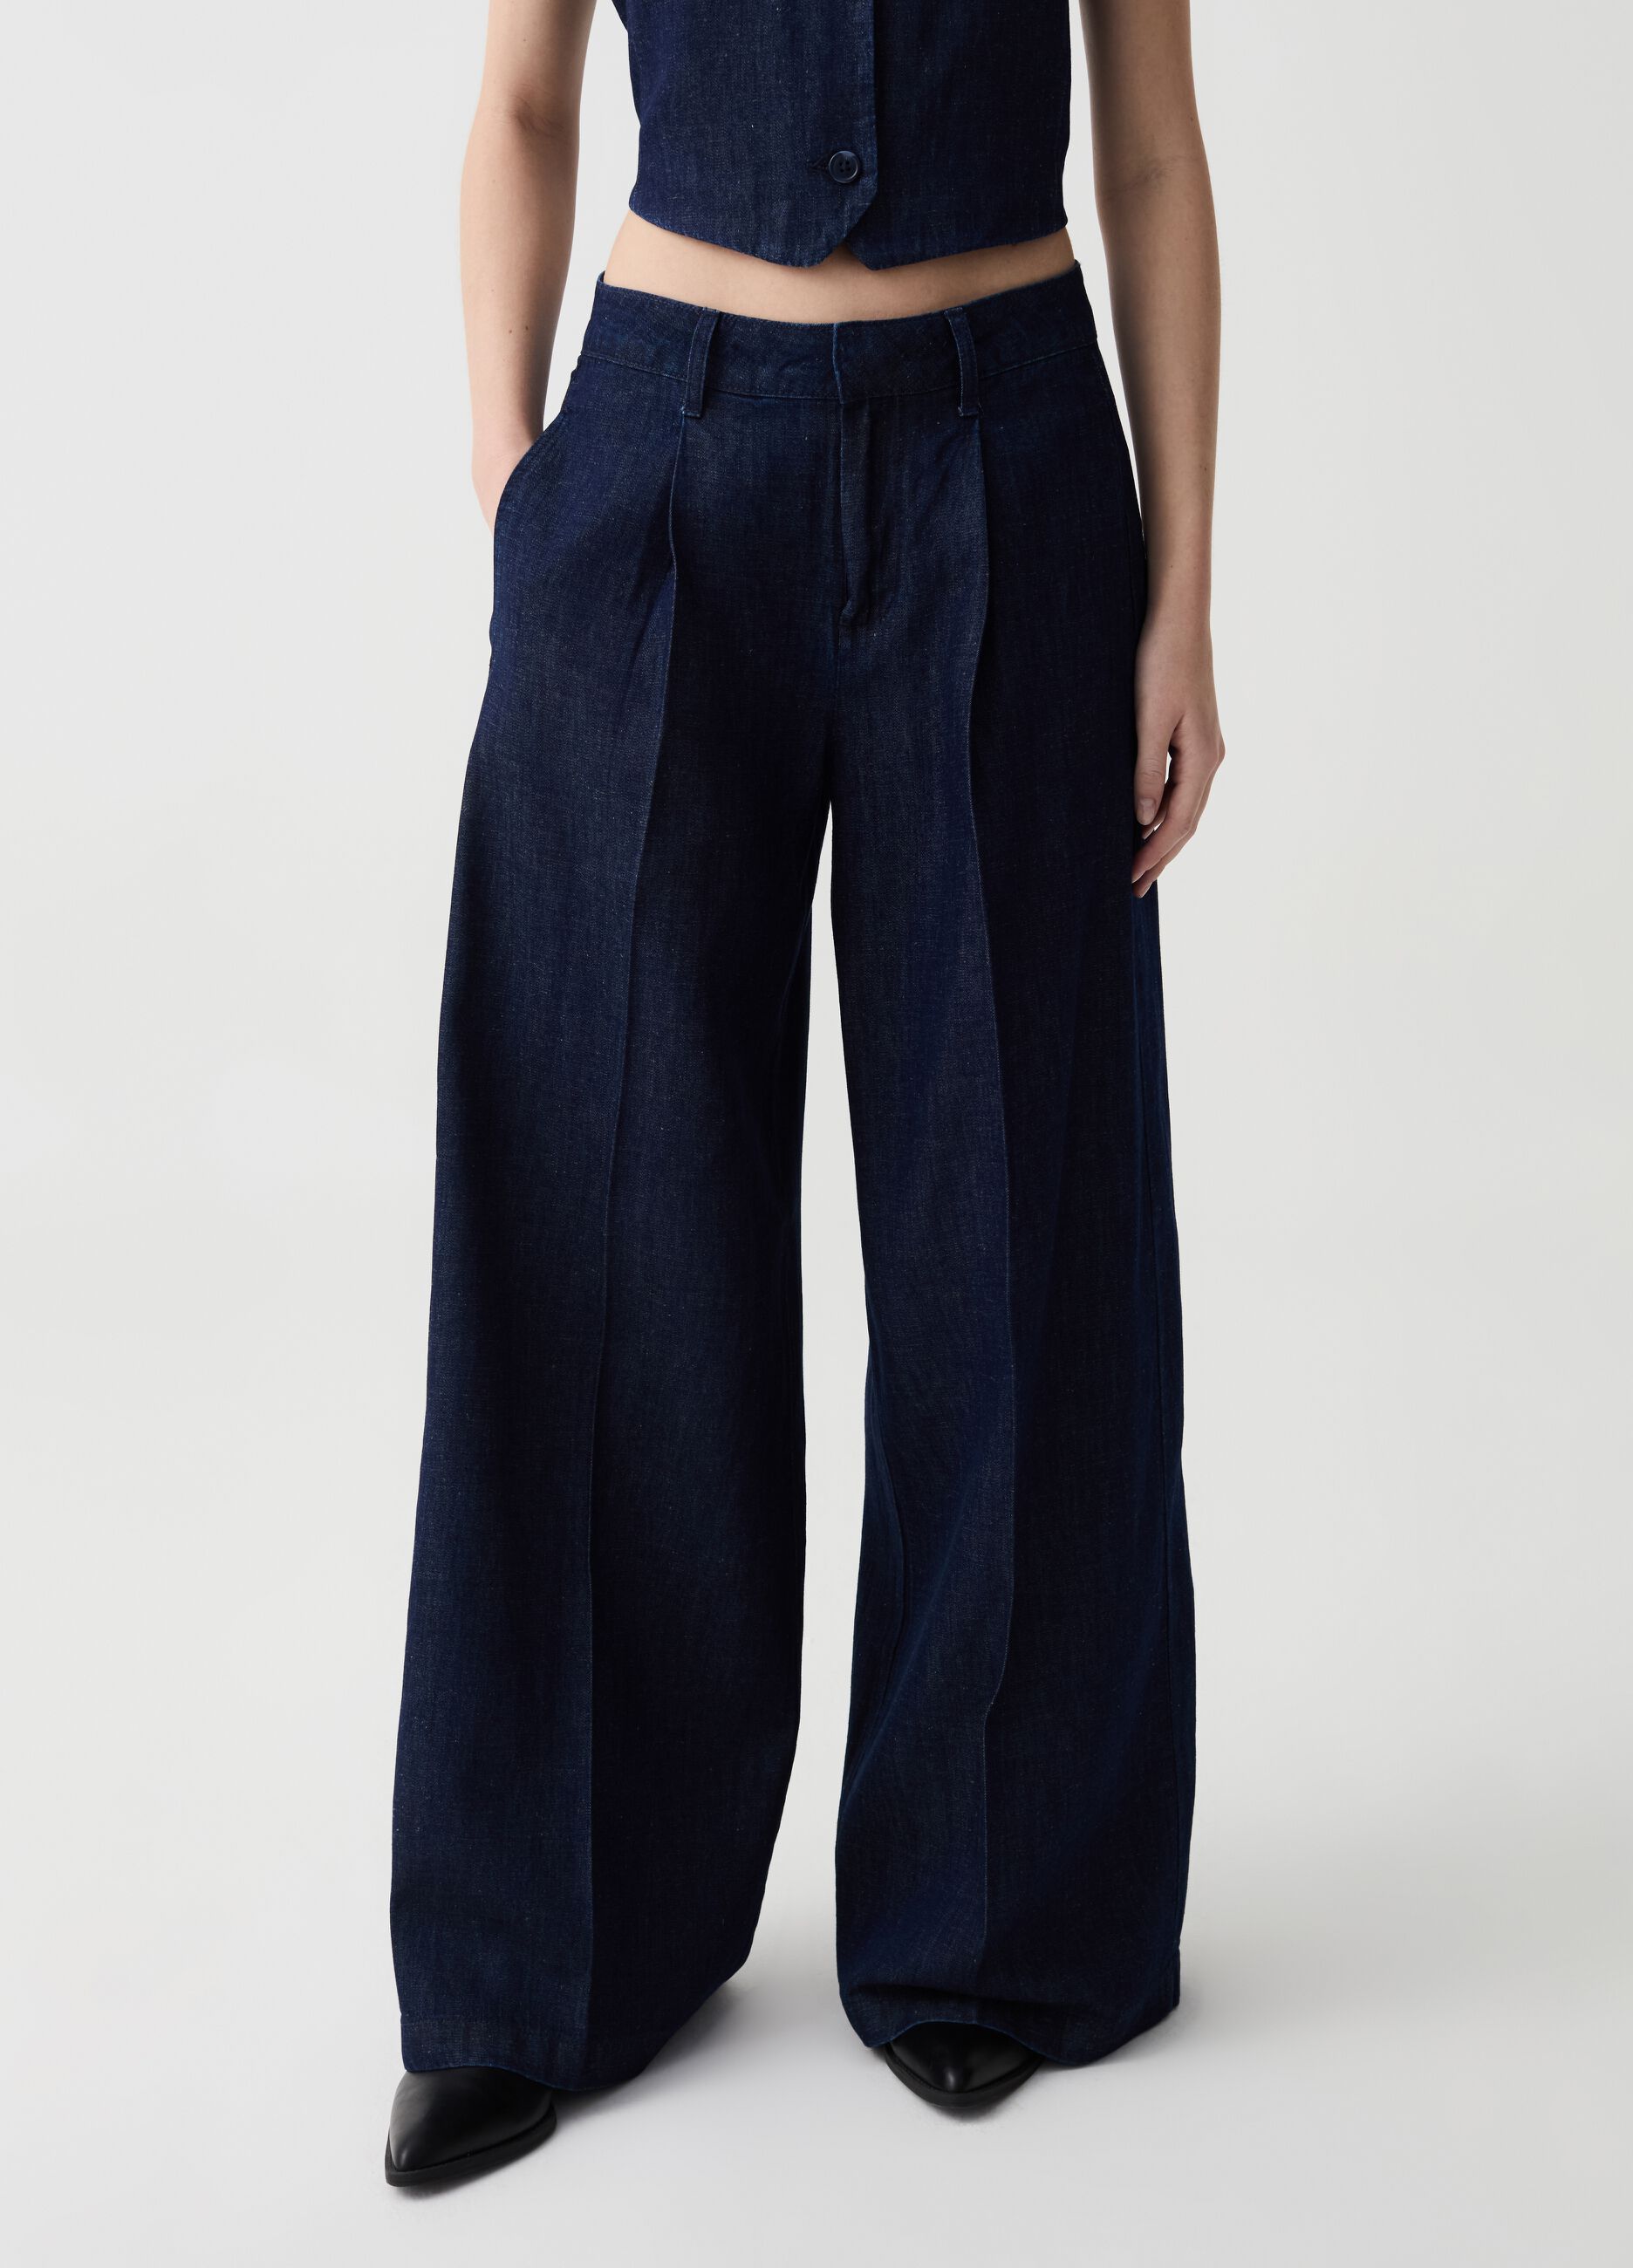 Wide-leg palazzo trousers in denim with darts